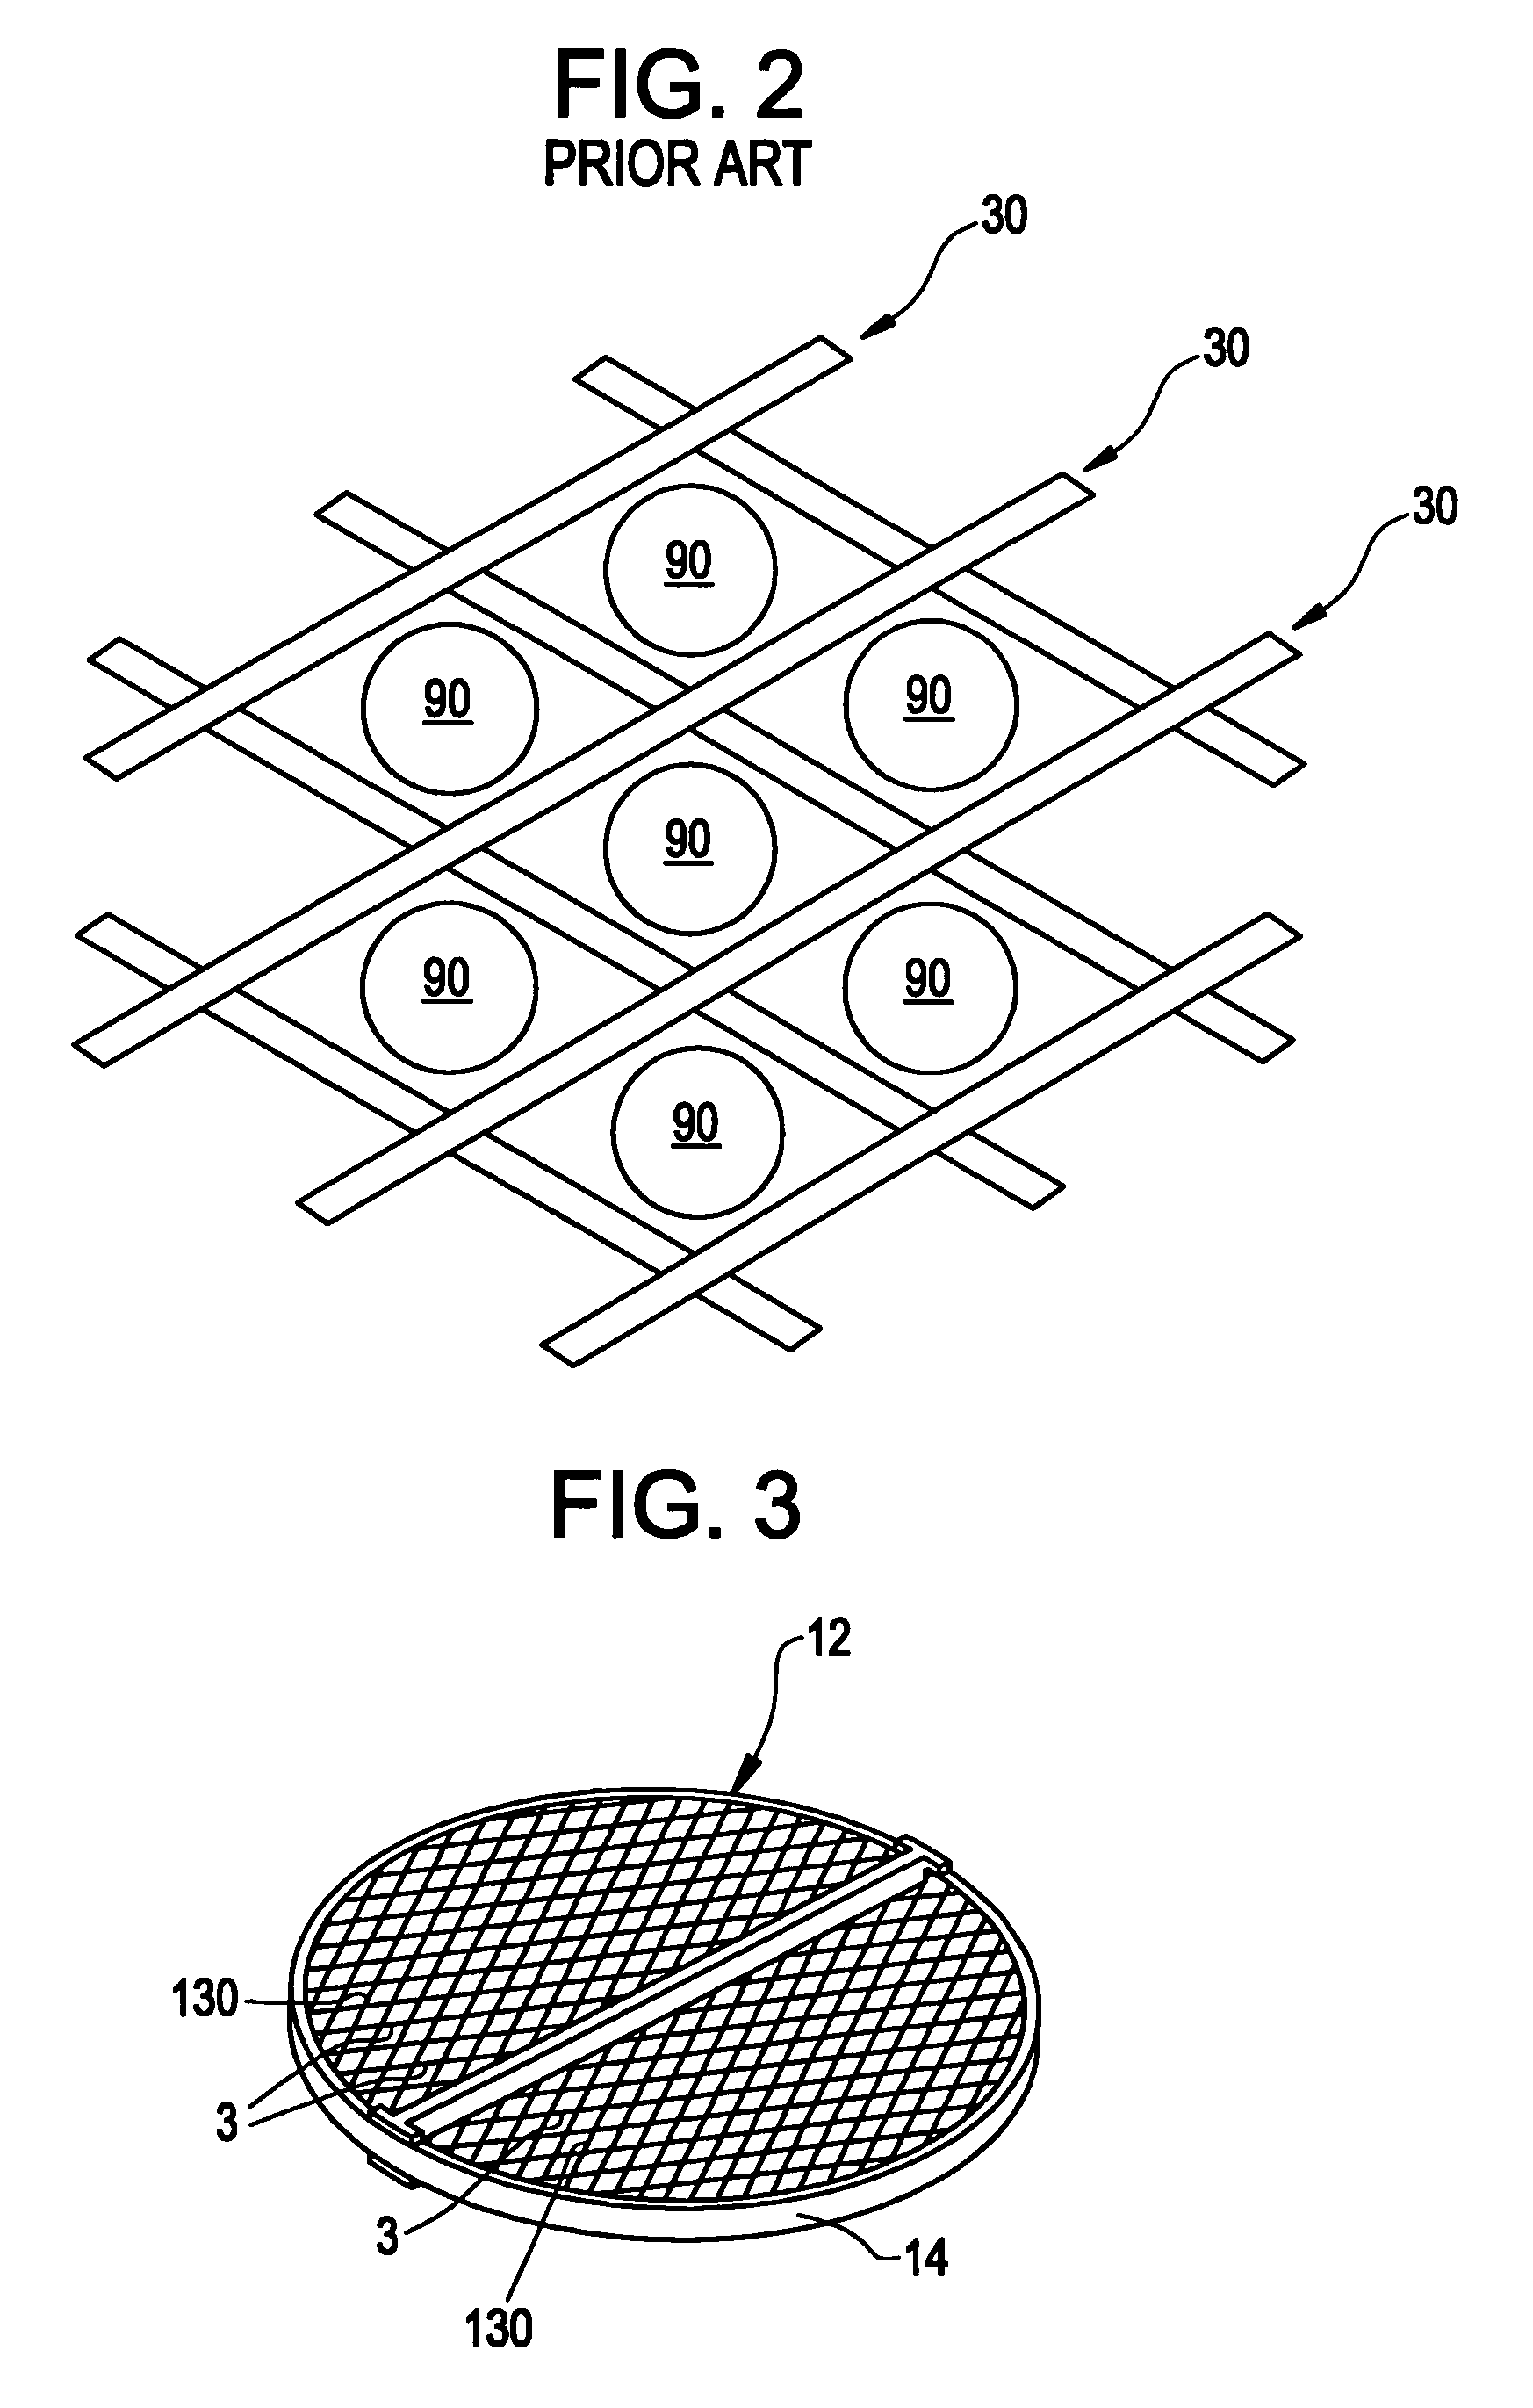 Anti-vibration support for steam generator heat transfer tubes and method for making same